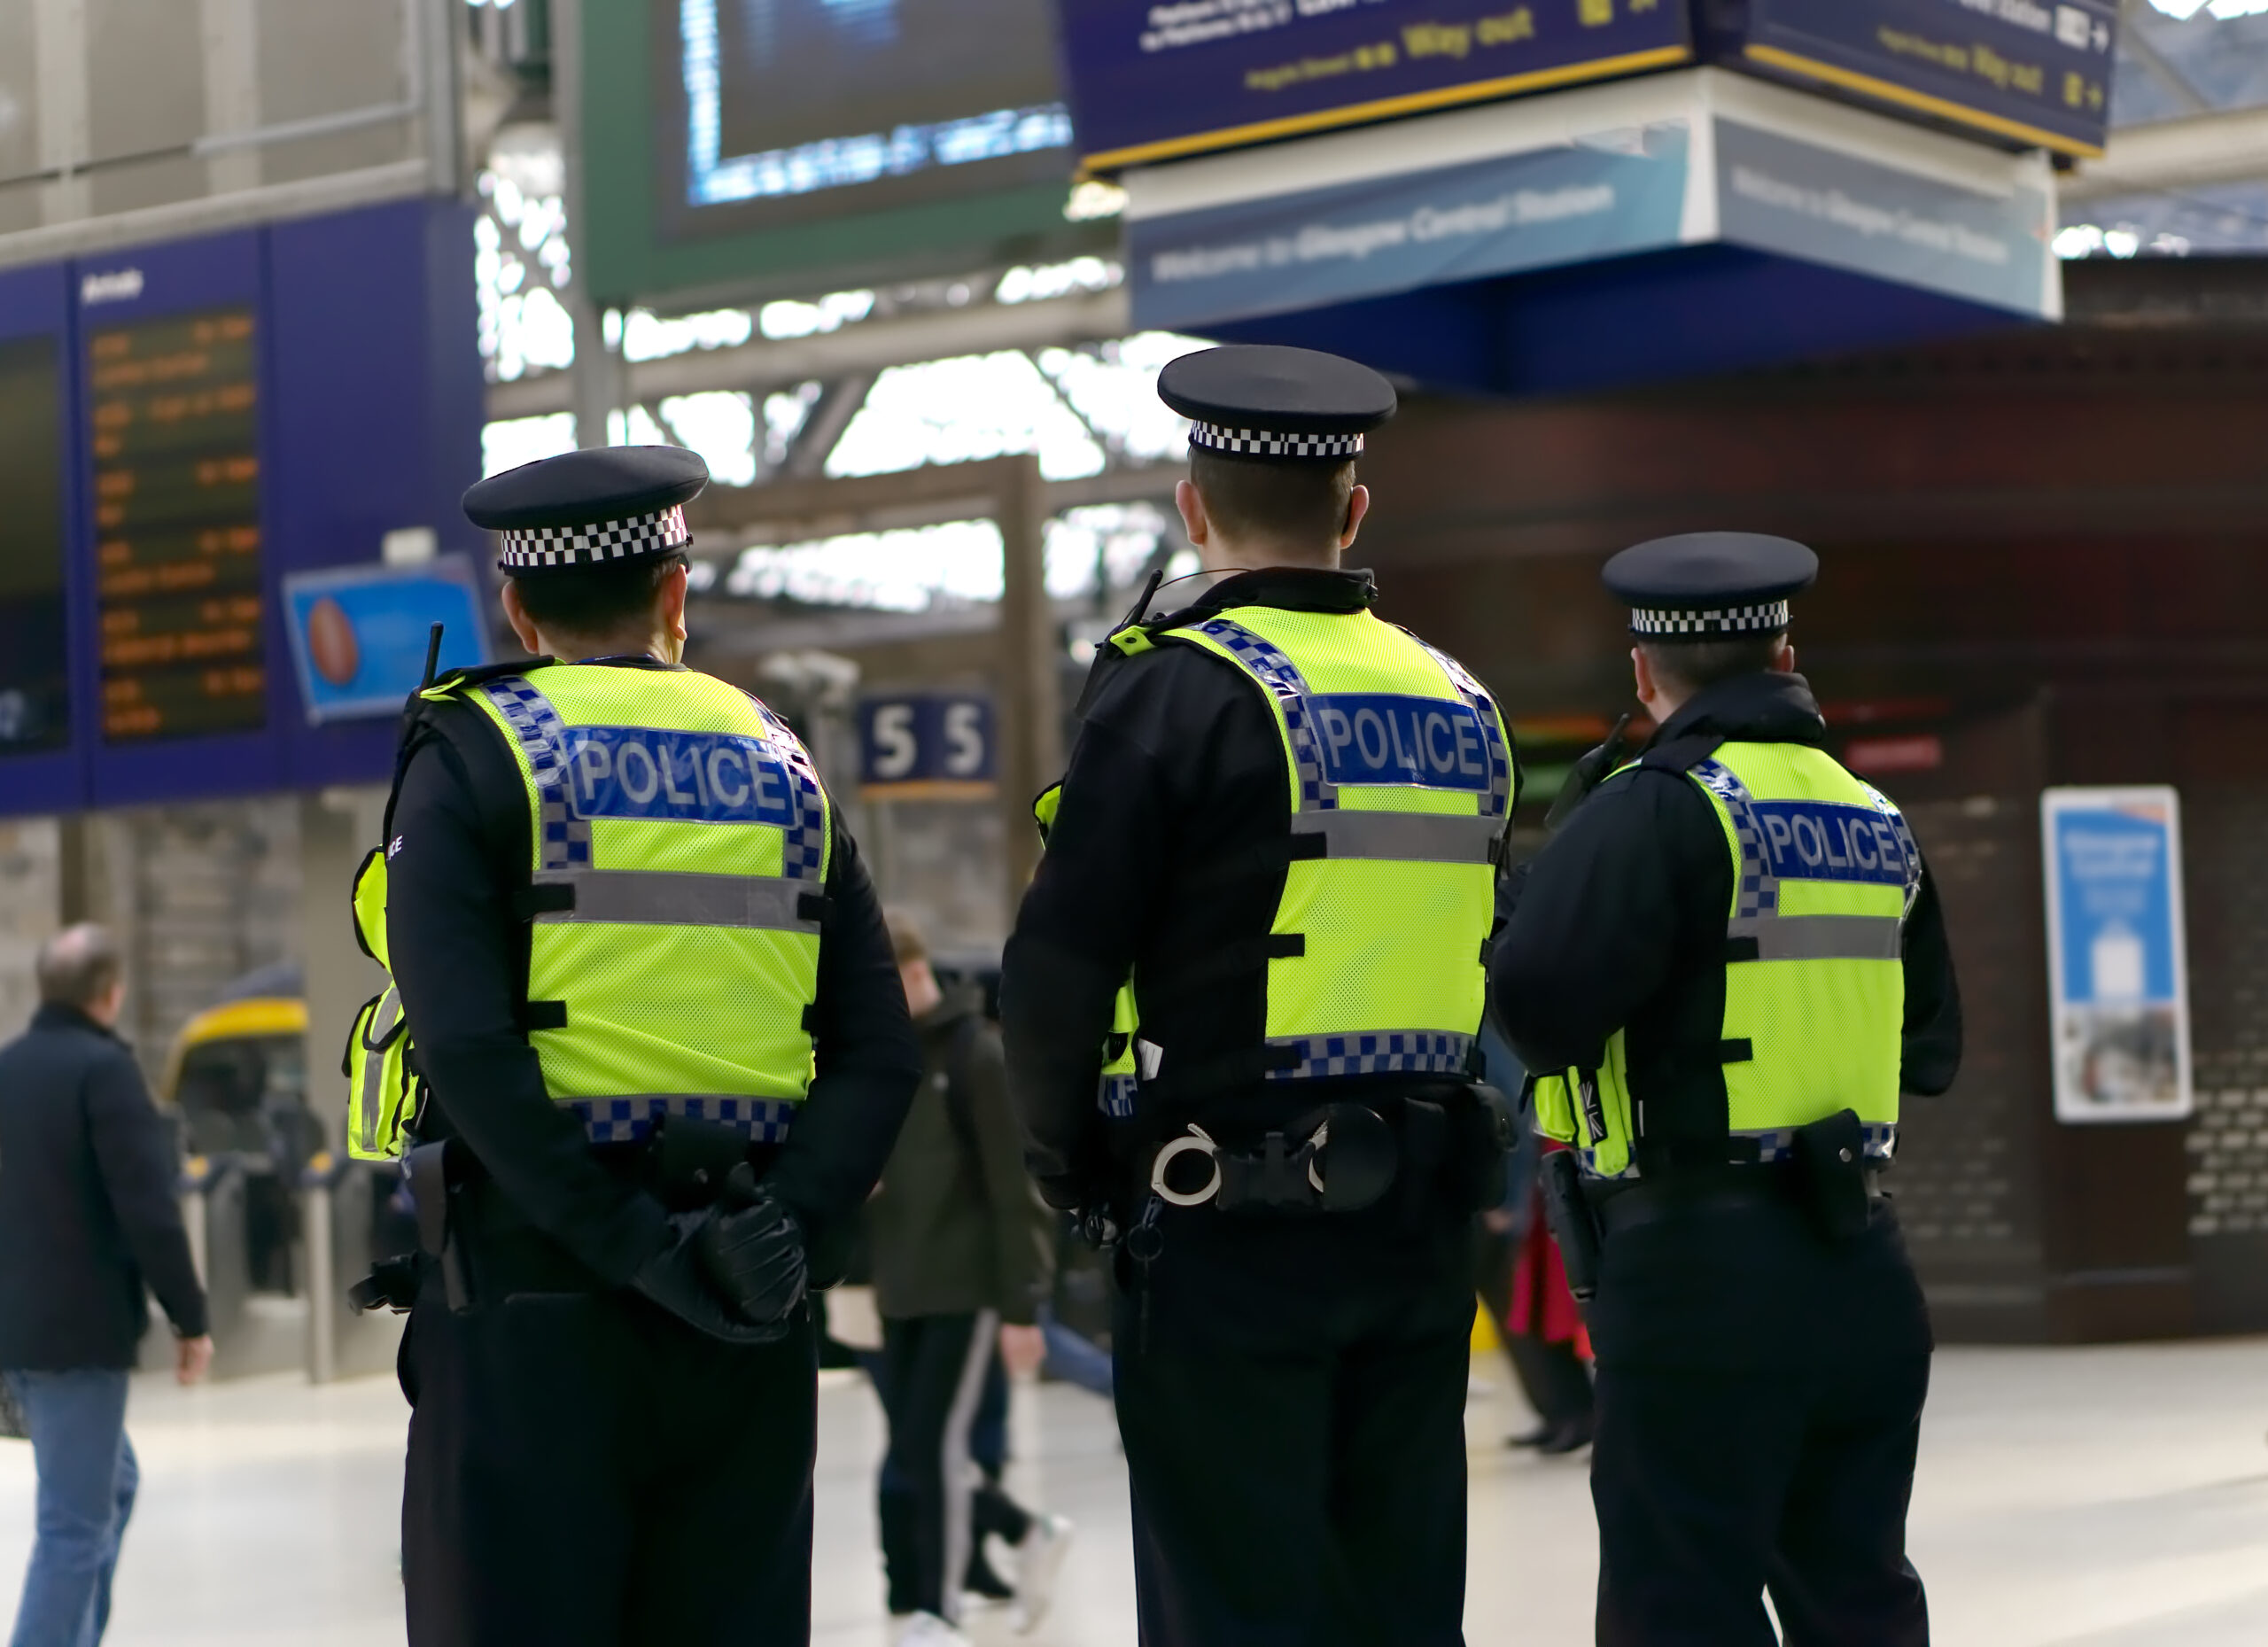 UK police stand surveying train station for blog about compensation for damage caused by police.